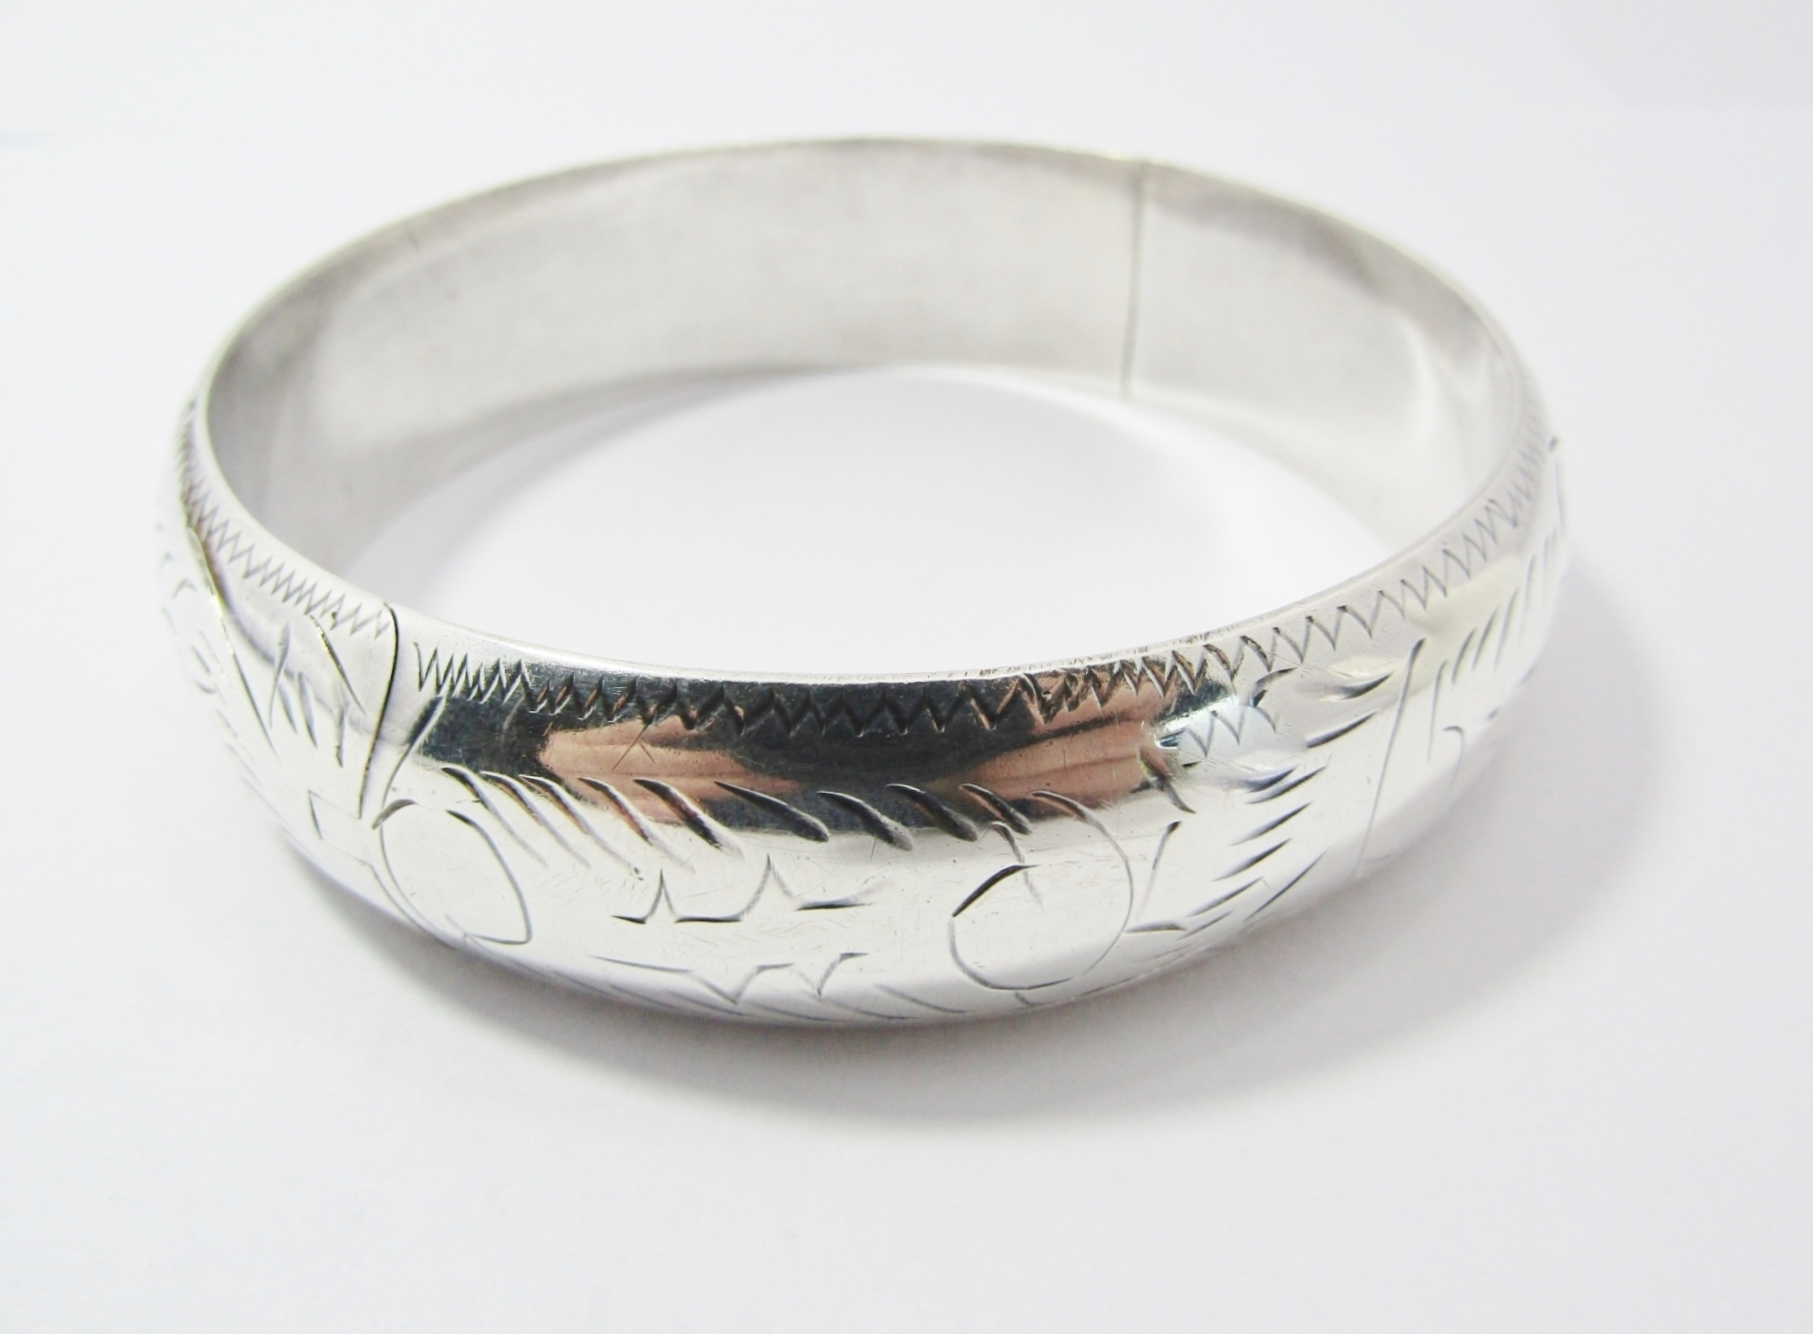 A Gorgeous Broad Engraved Hinged Bangle in Sterling Silver.